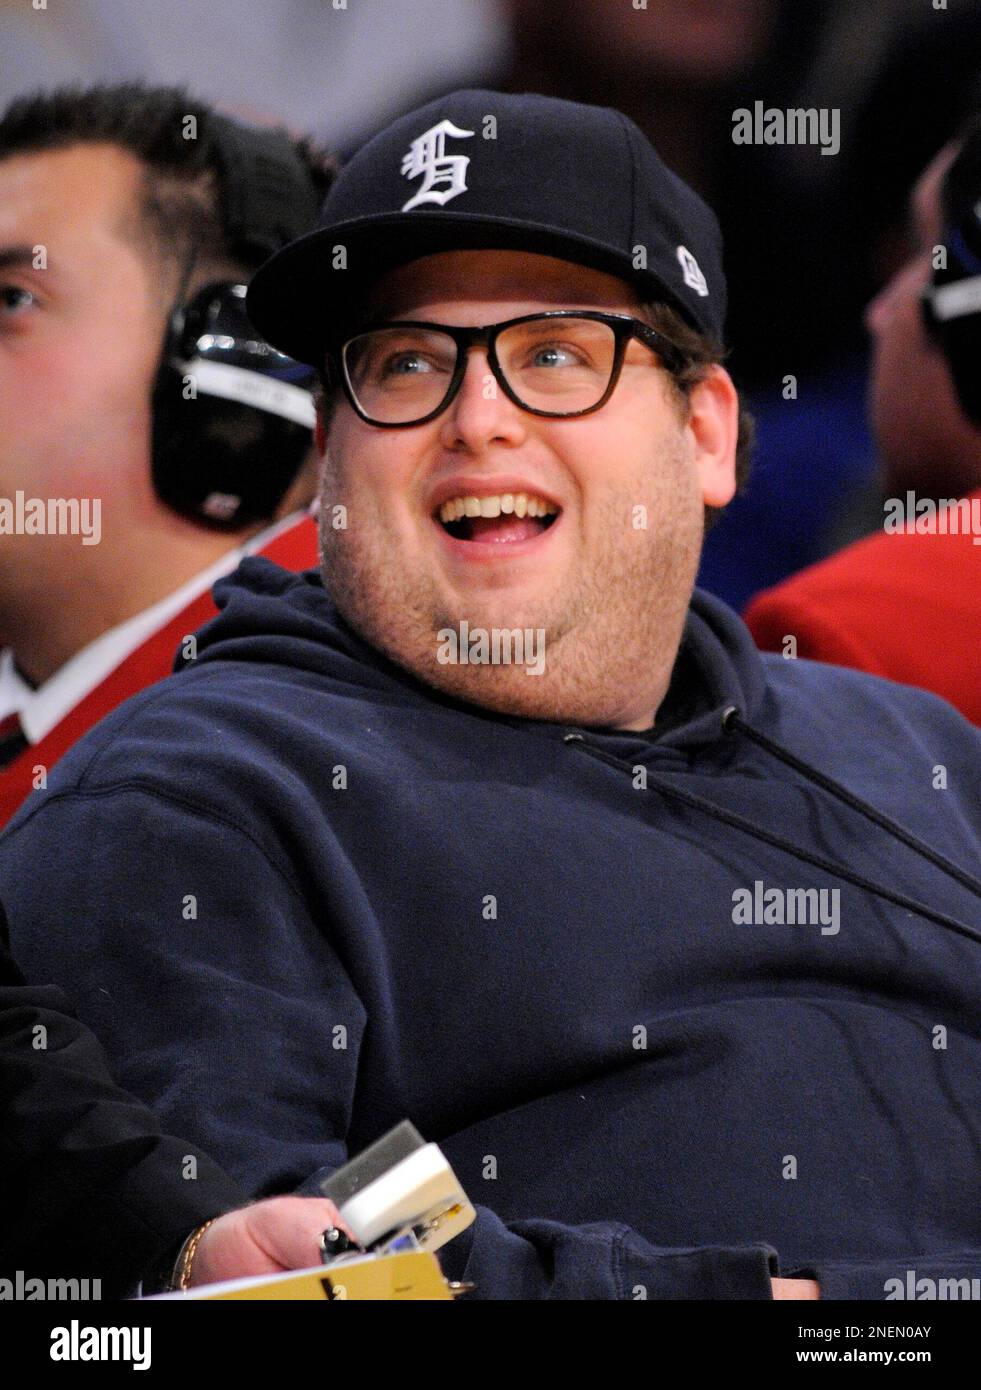 Actor Jonah Hill watches the Los Angeles Lakers play the New Jersey Nets  during the second half of their NBA basketball game, Sunday, Nov. 29, 2009,  in Los Angeles. The Lakers won